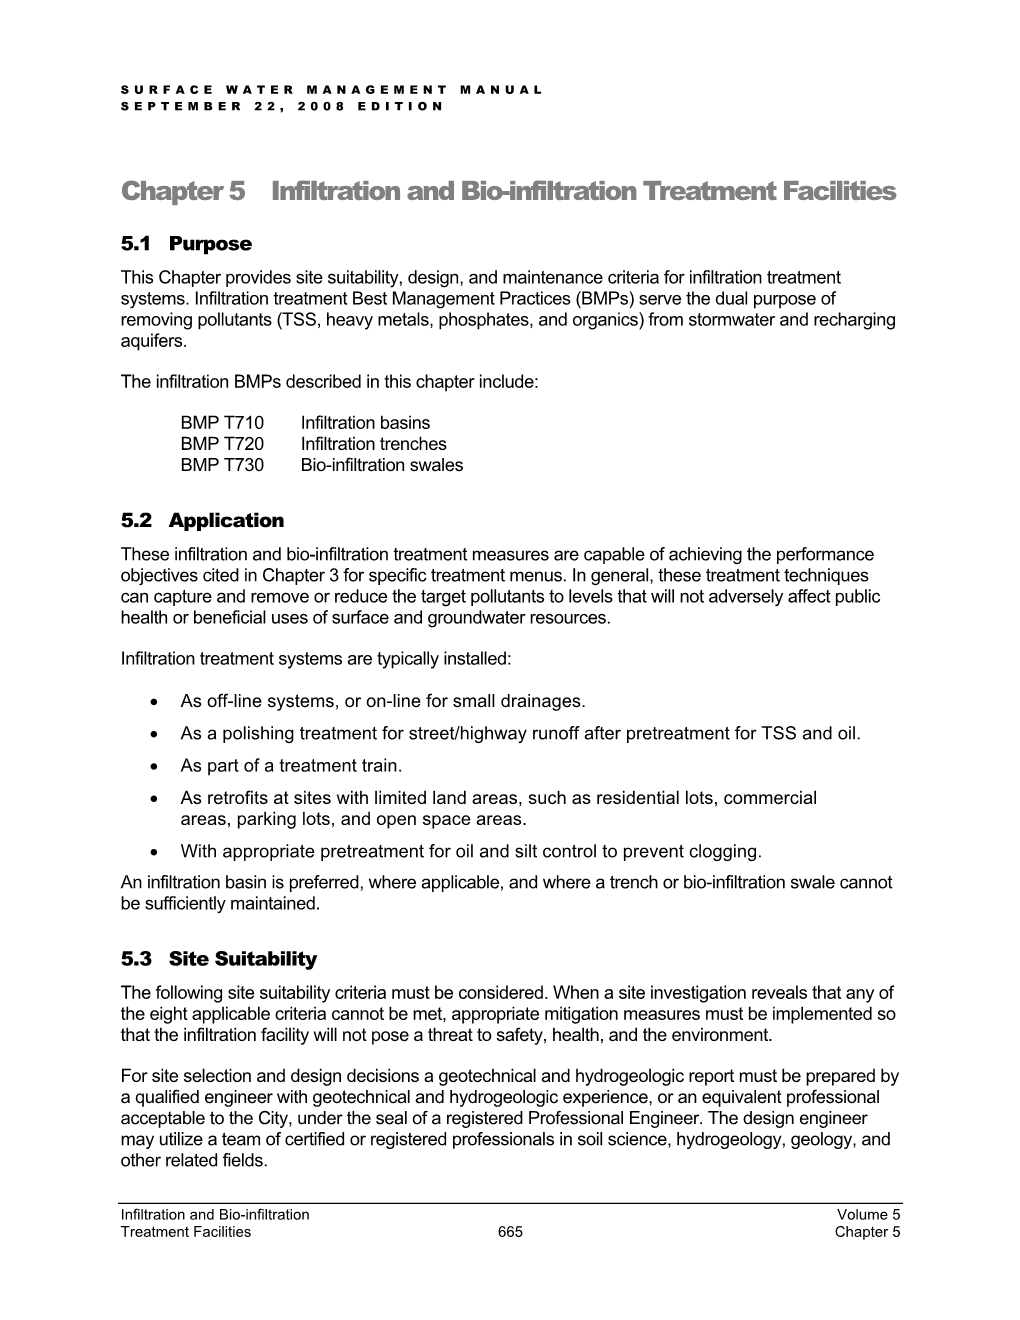 Chapter 5 Infiltration and Bio-Infiltration Treatment Facilities